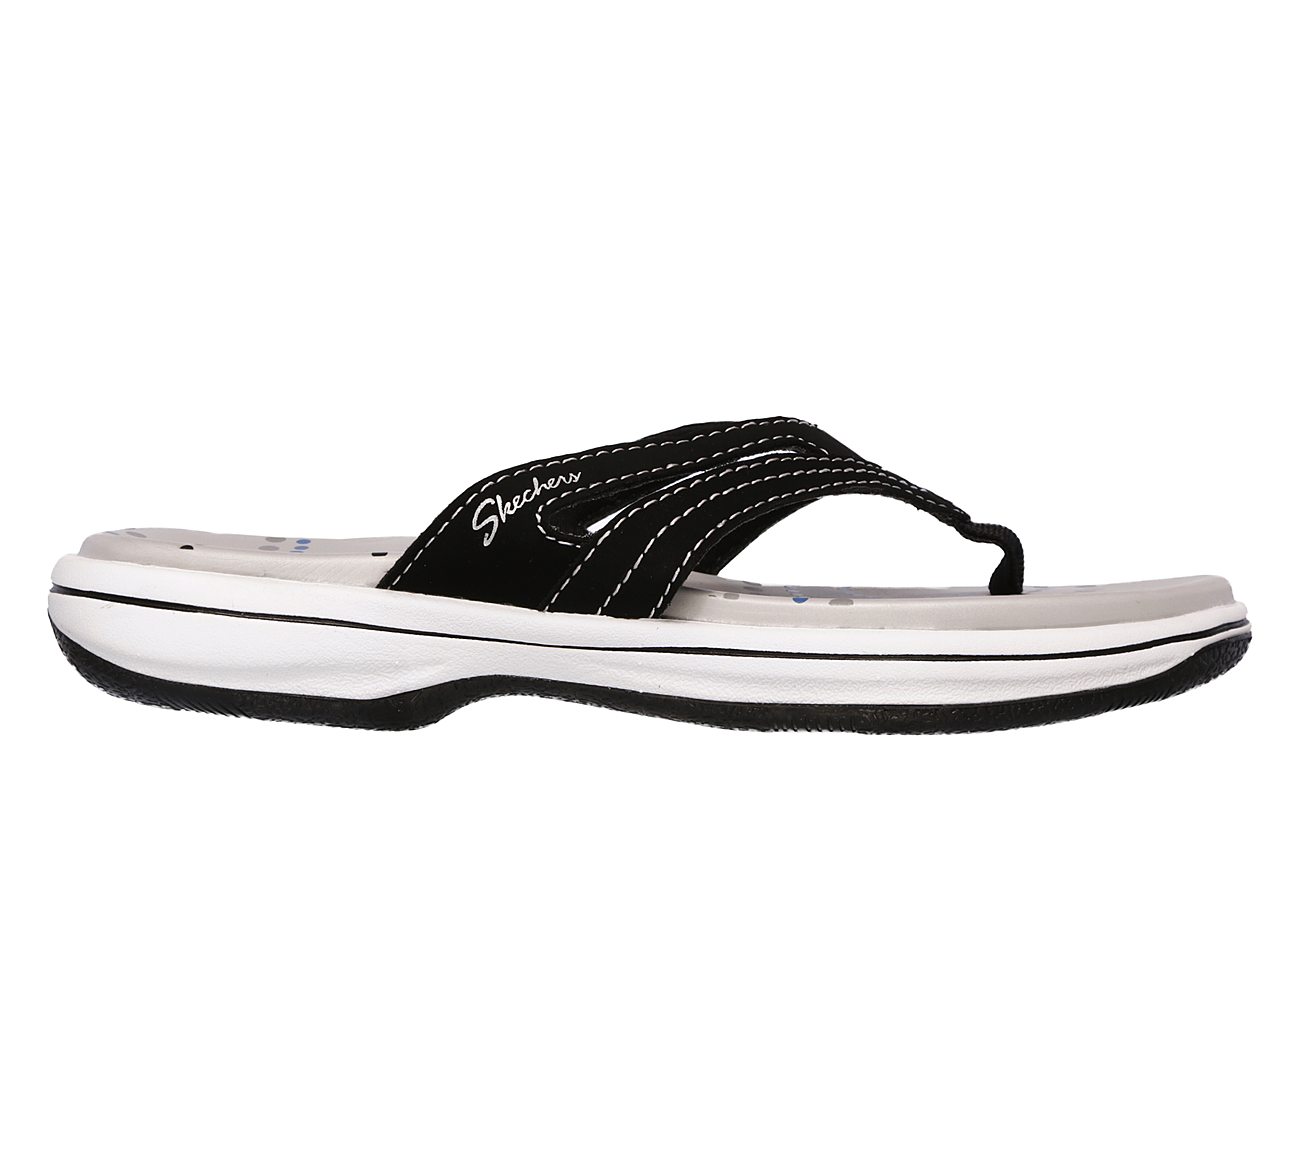 skechers relaxed step sandals